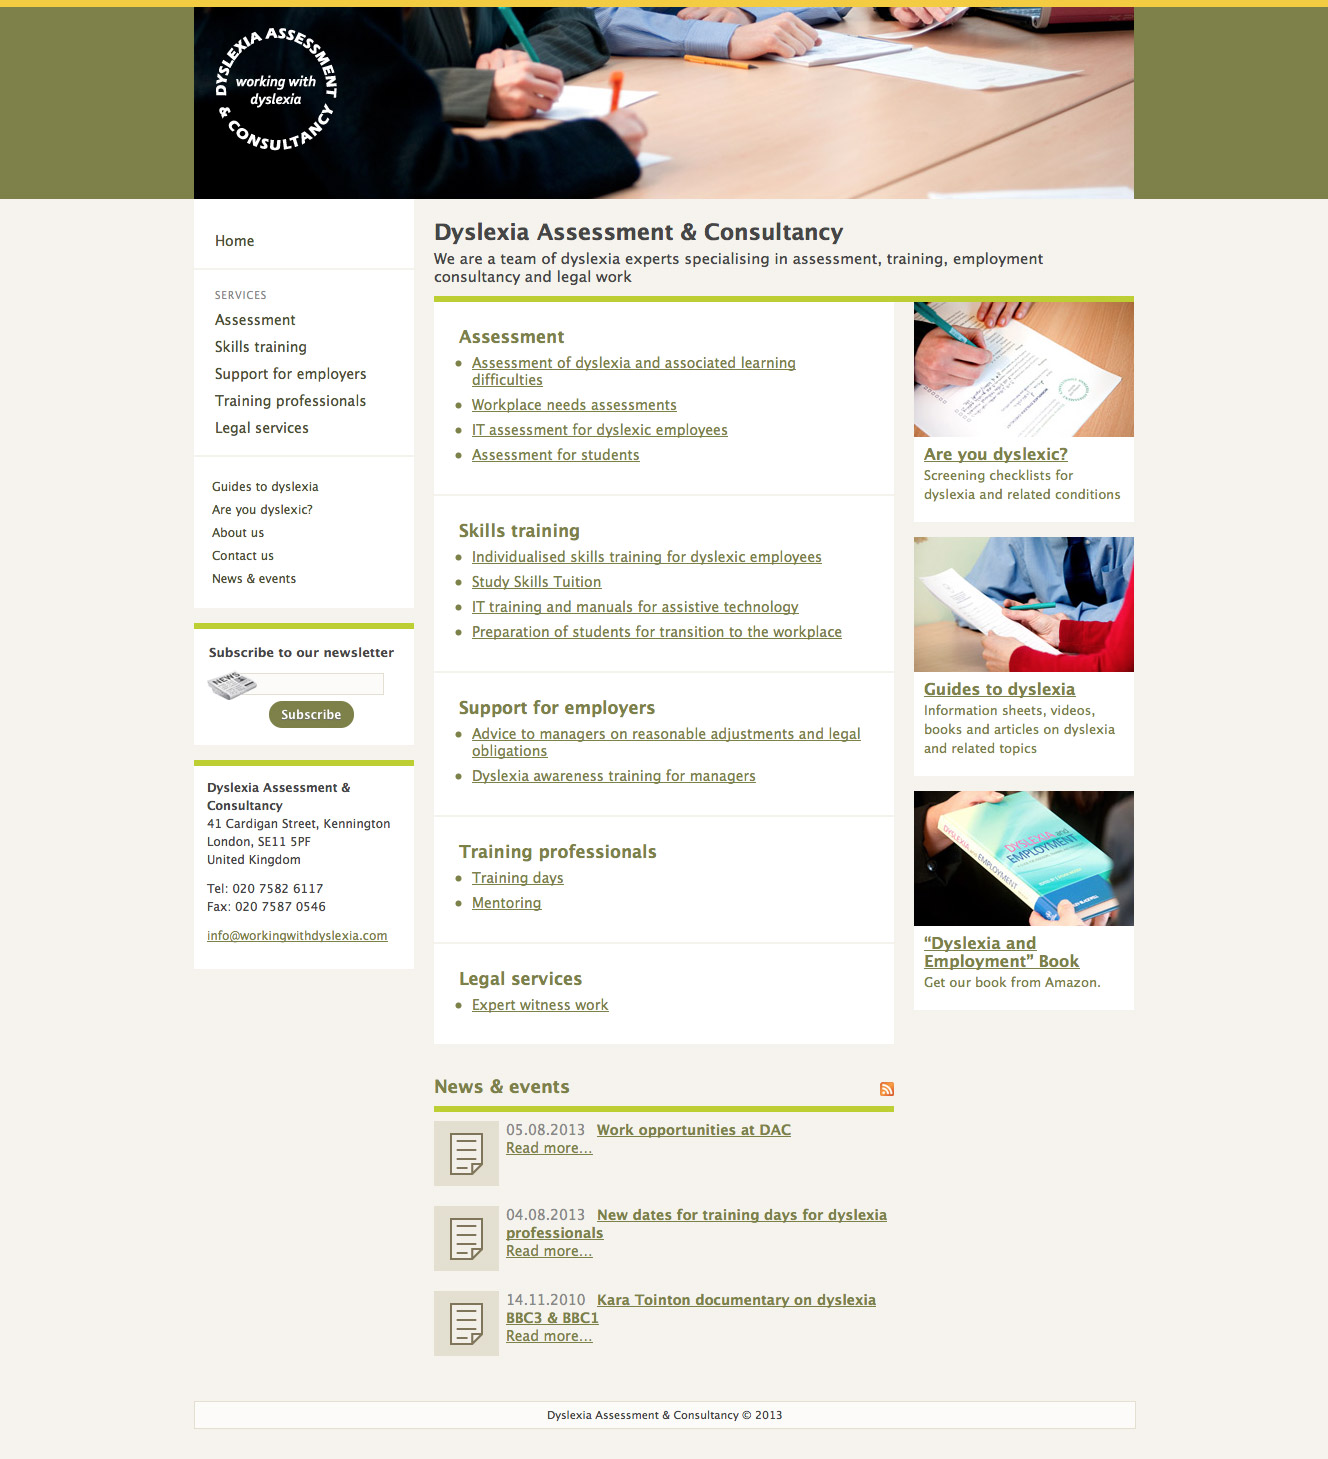 Dyslexia Assessment & Consultancy homepage design